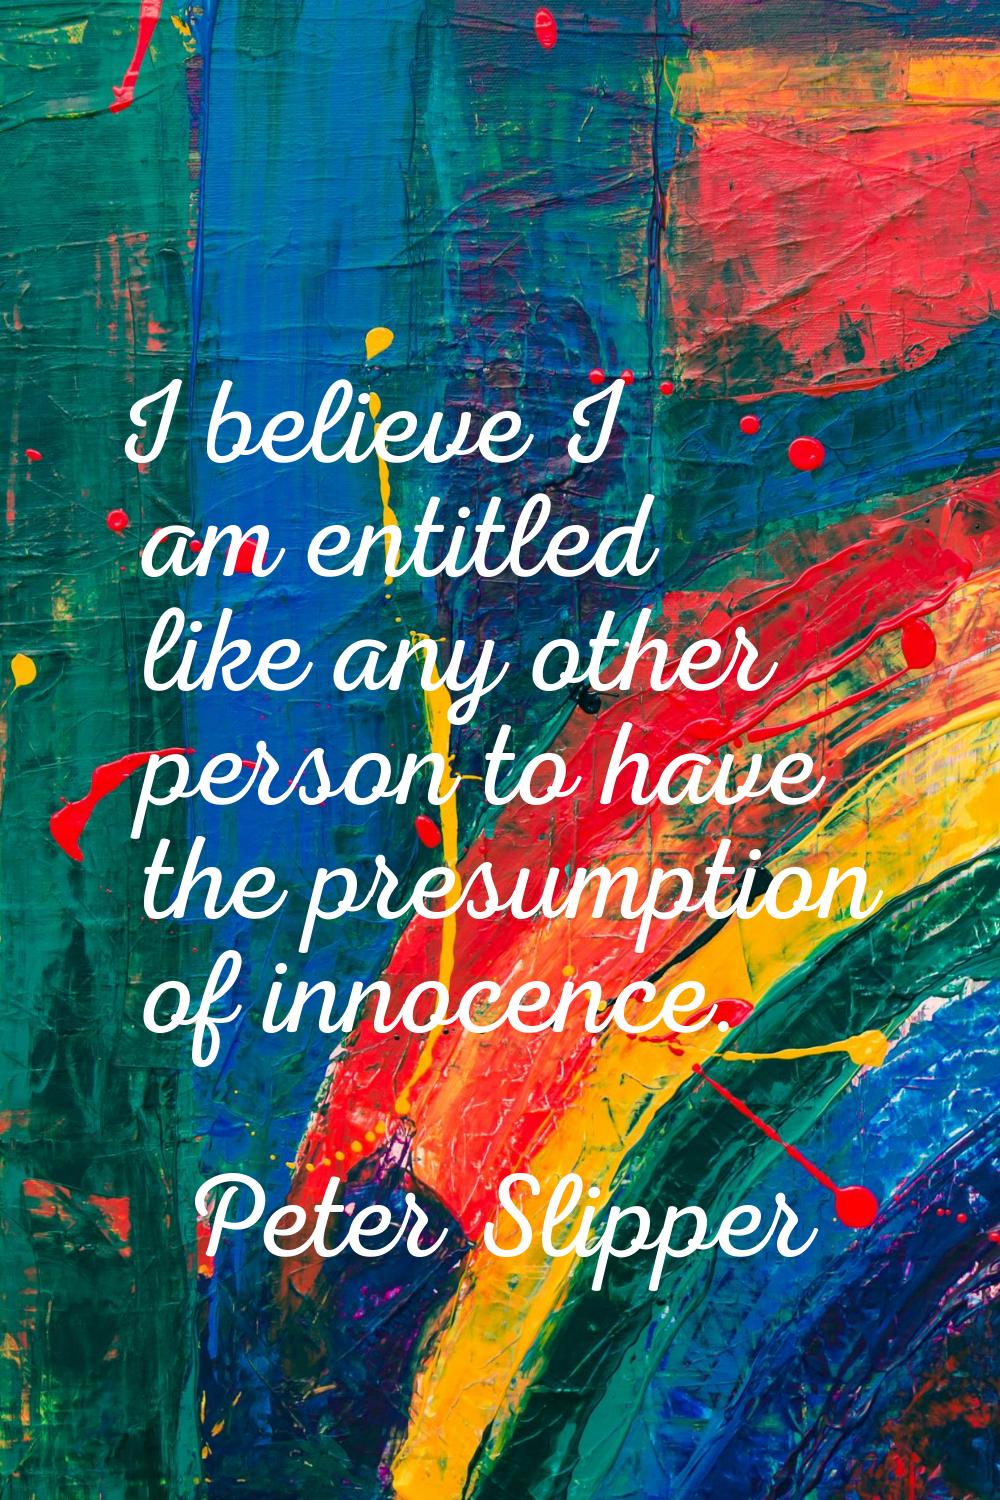 I believe I am entitled like any other person to have the presumption of innocence.